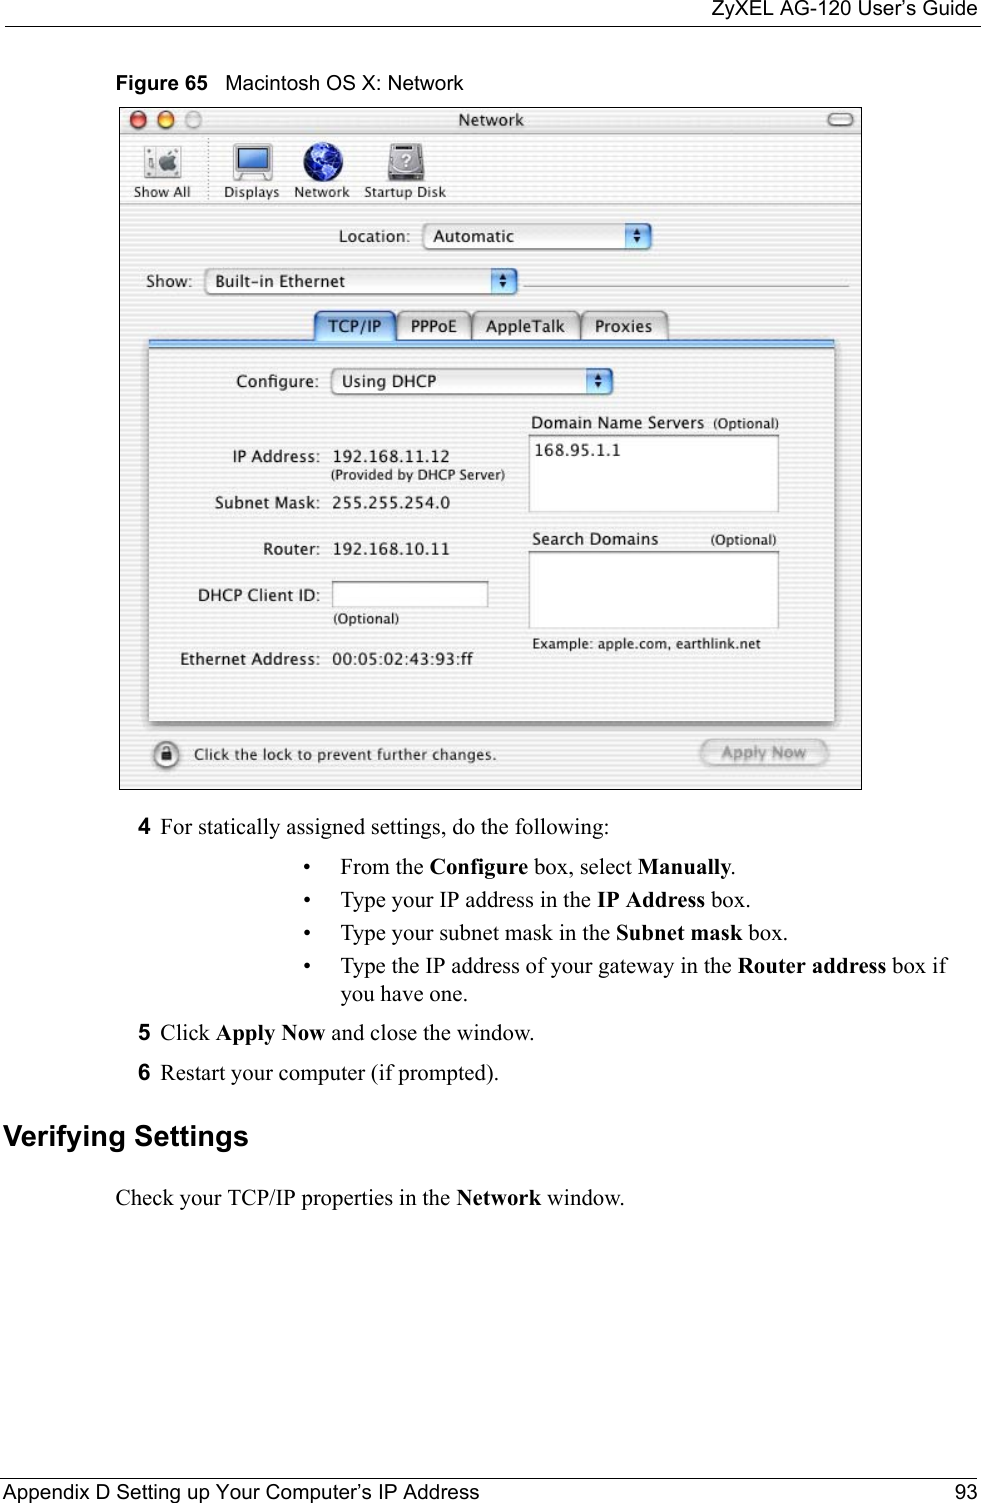 ZyXEL AG-120 User’s GuideAppendix D Setting up Your Computer’s IP Address 93Figure 65   Macintosh OS X: Network4For statically assigned settings, do the following:•From the Configure box, select Manually.• Type your IP address in the IP Address box.• Type your subnet mask in the Subnet mask box.• Type the IP address of your gateway in the Router address box if you have one.5Click Apply Now and close the window.6Restart your computer (if prompted).Verifying SettingsCheck your TCP/IP properties in the Network window.